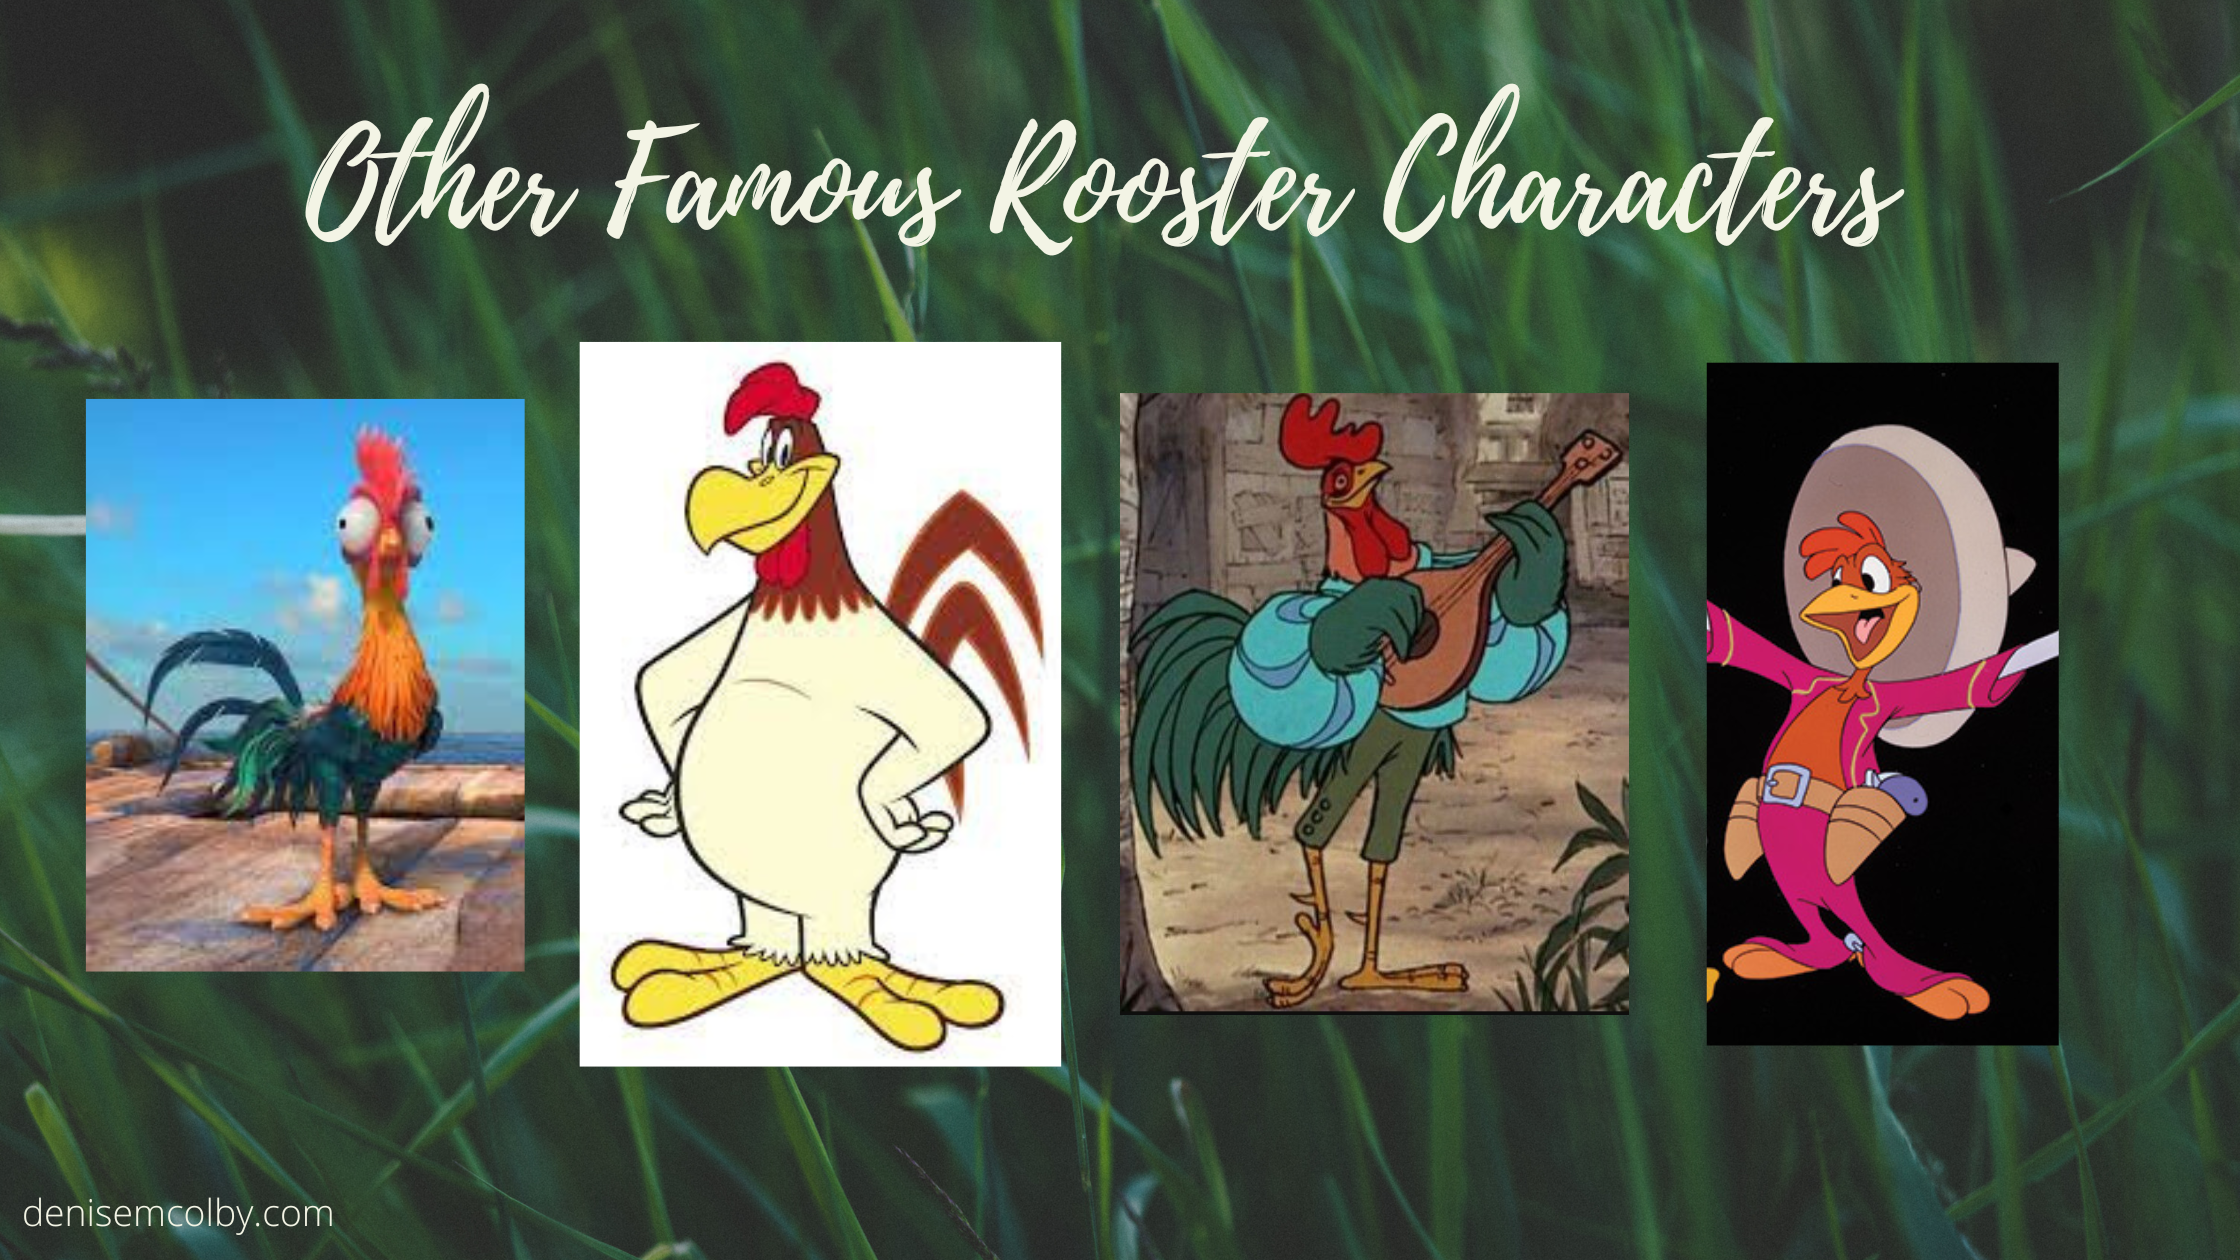 a compilation image of 4 rooster characters from Moana (hey hey), Robin Hood (Alan-A-Dale), Looney Tunes (Foghorn), & Three Caballeros (Panchito Pistoles)